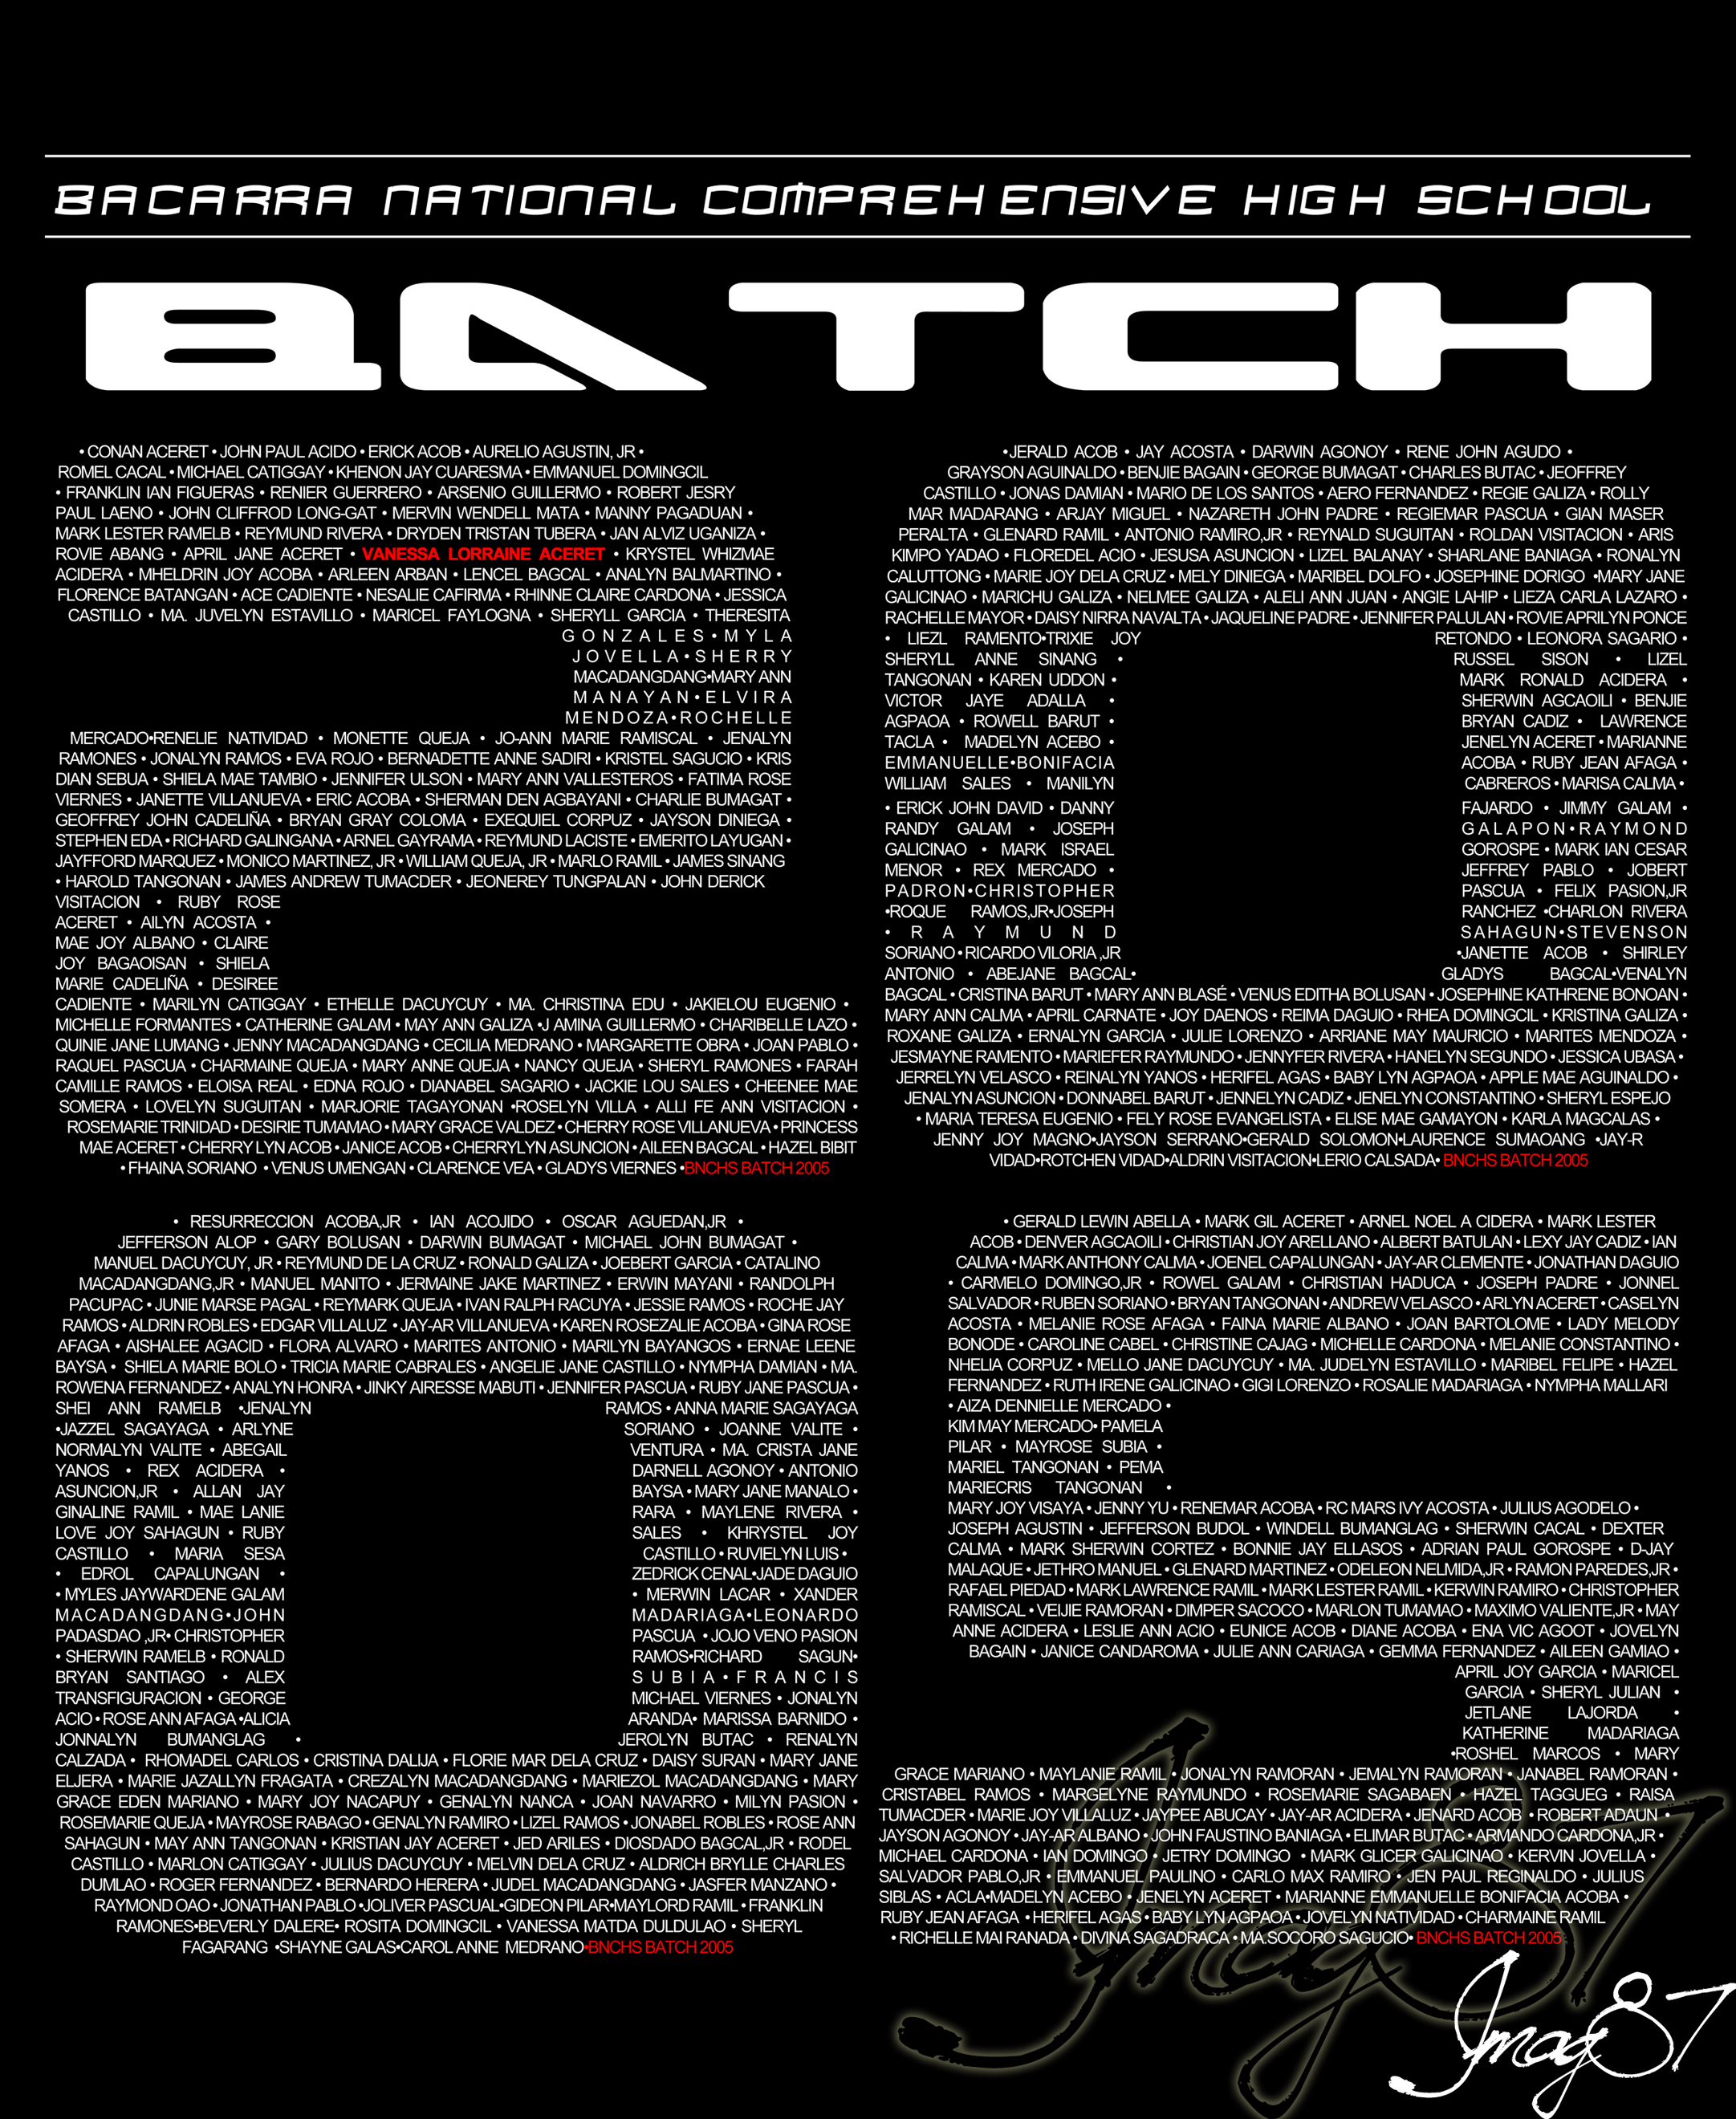 bnchs 2005 tshirt layout by jmag87 on Clipart library